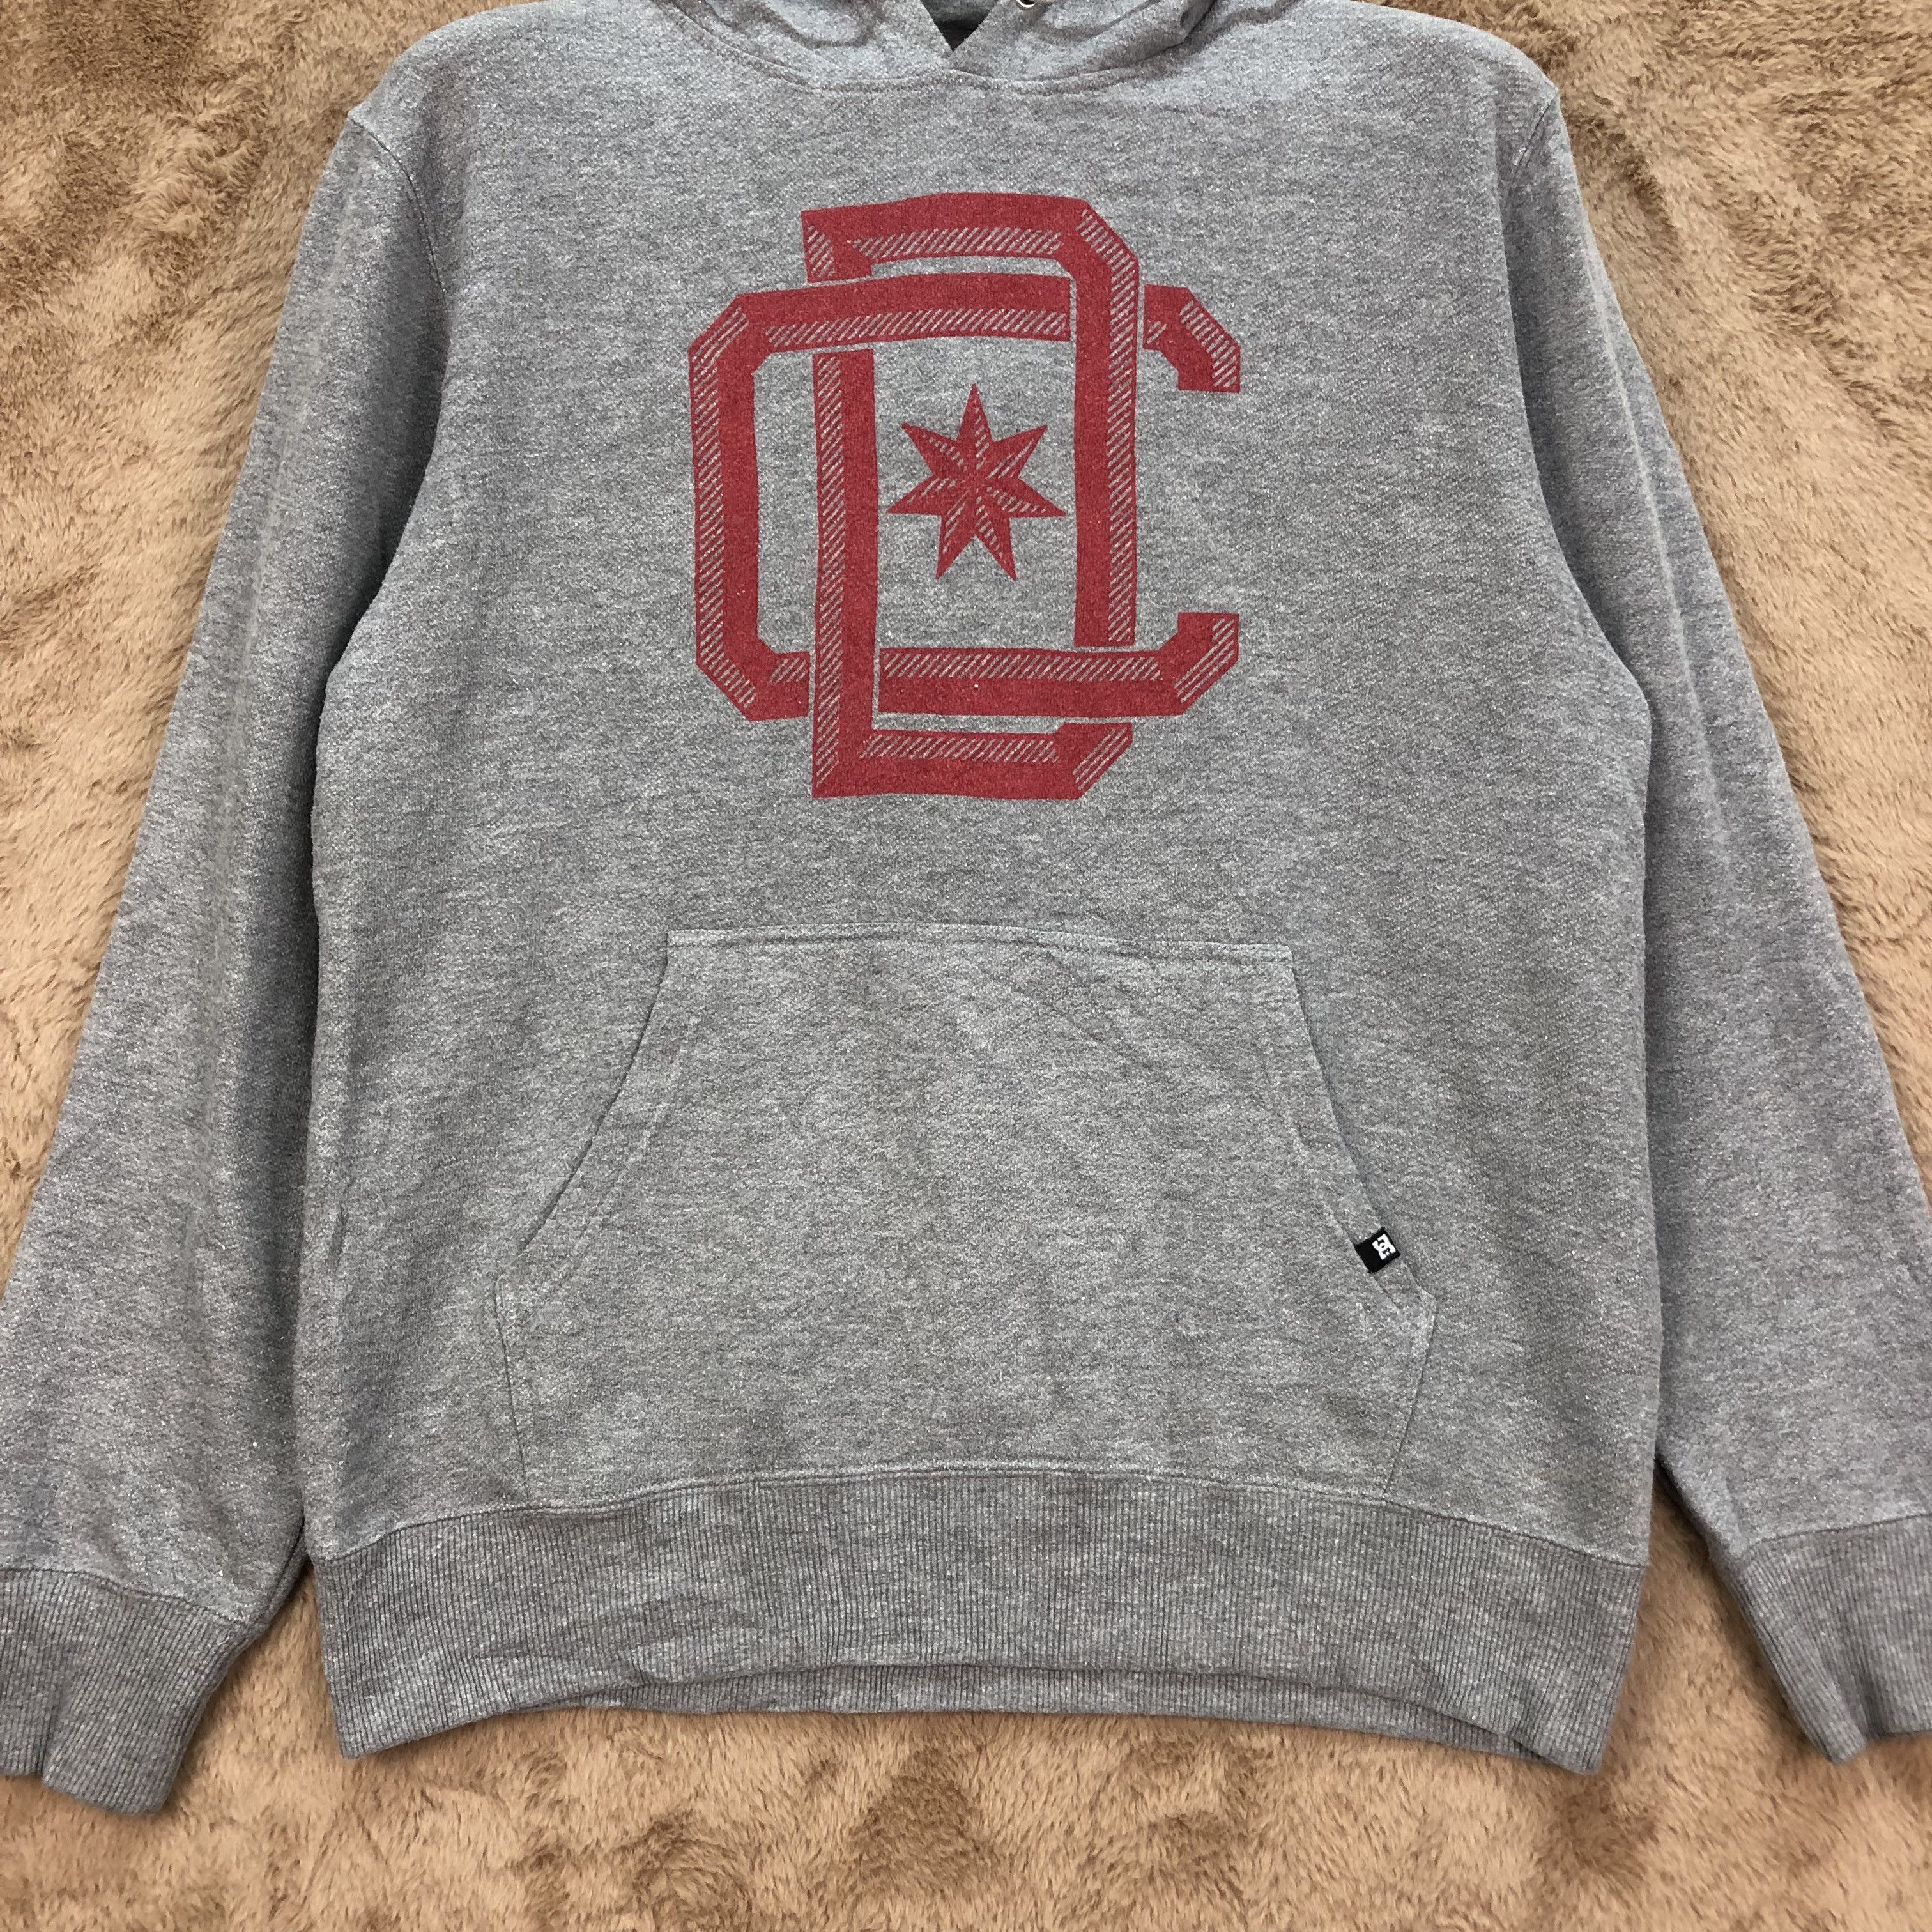 DC SHOES Big Logo Pullover Hoodies #4986-25 - 4